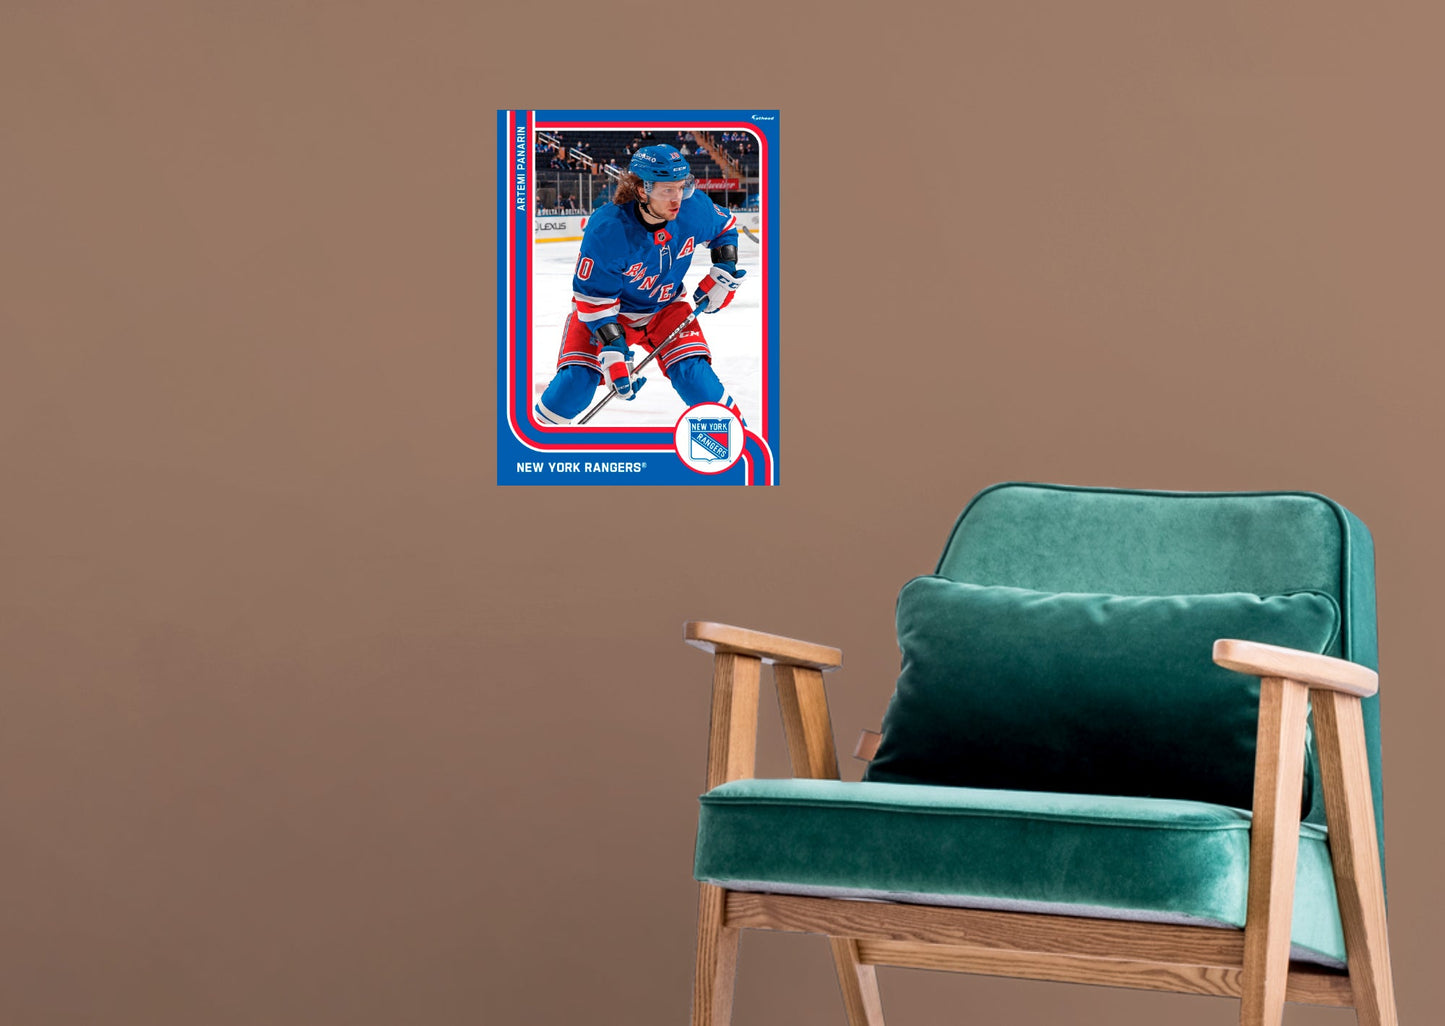 New York Rangers: Artemi Panarin Poster - Officially Licensed NHL Removable Adhesive Decal